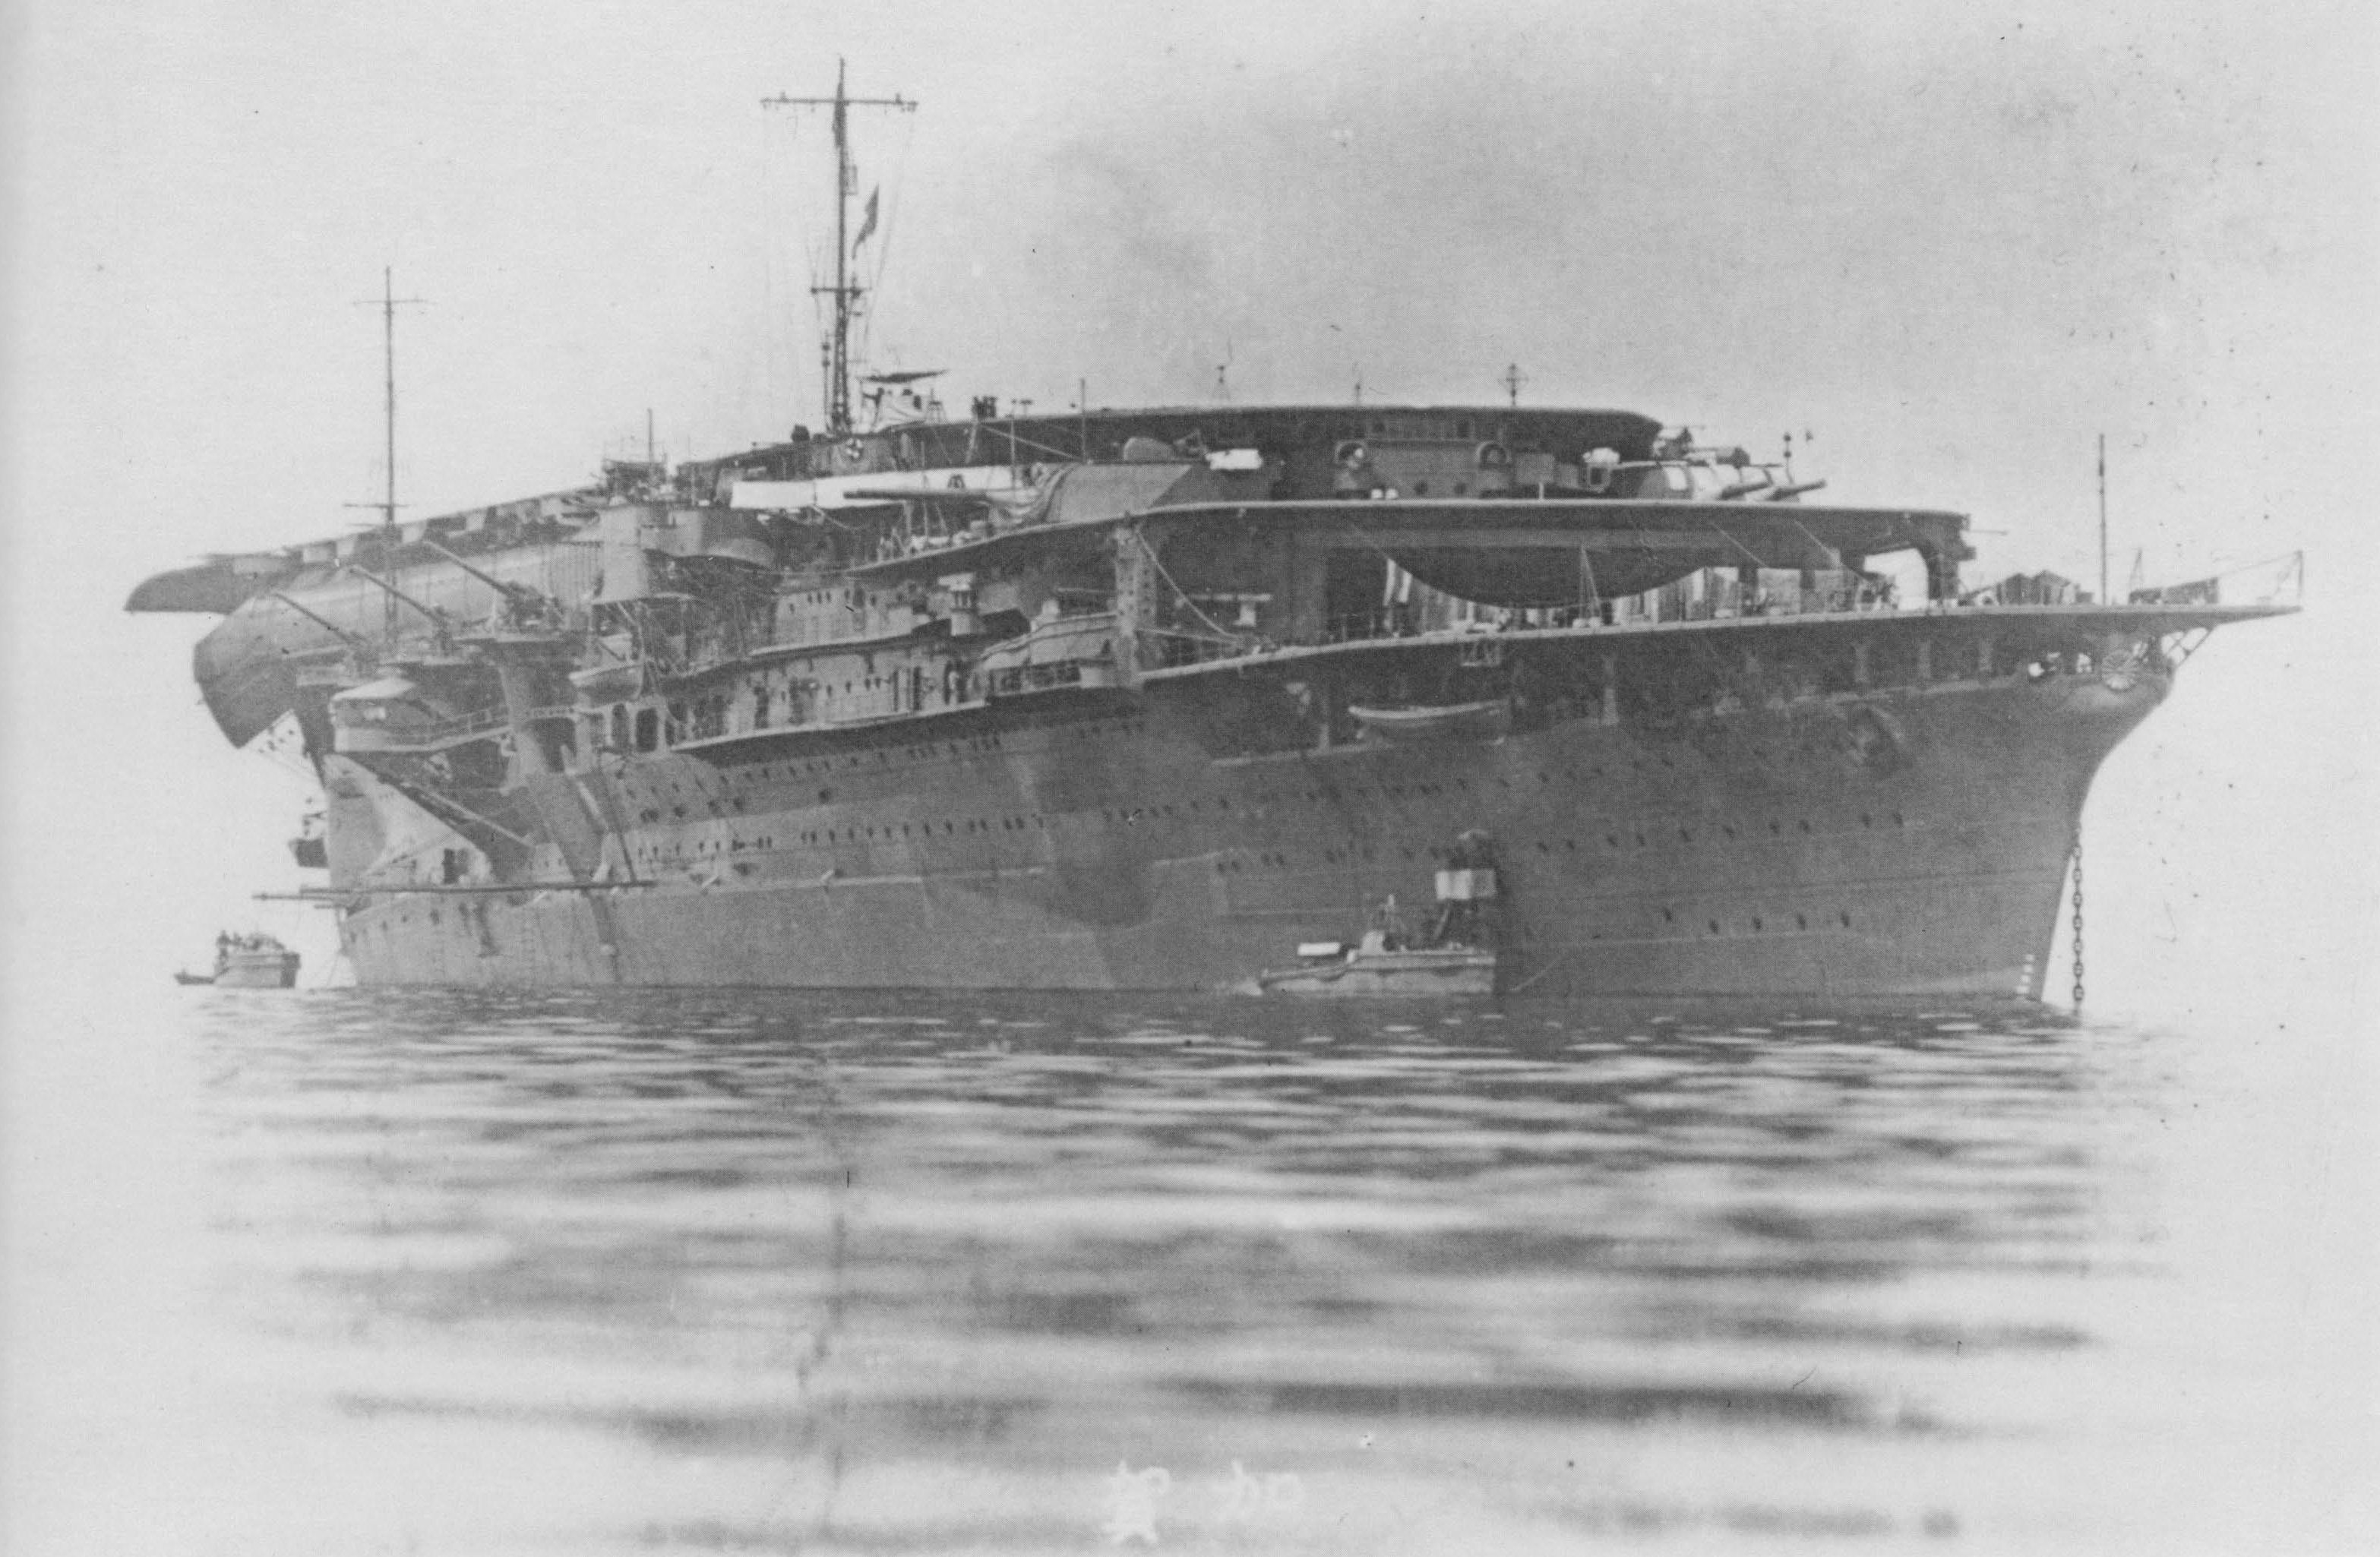 Imperial Japanese Navy aircraft carrier Kaga anchored off Ikari Japan sometime in 1930 01